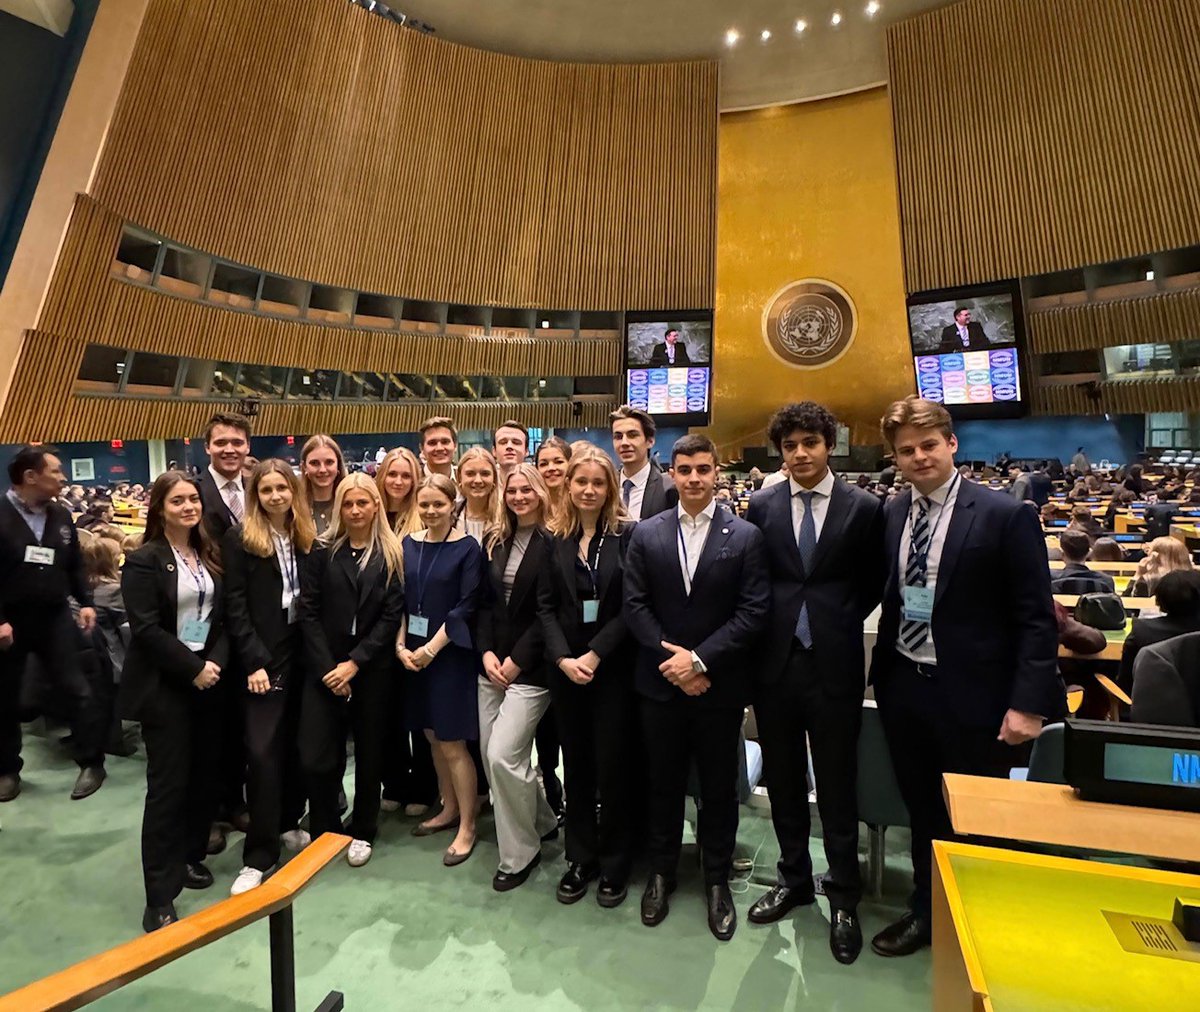 As part of their studies, a delegation of WHU students recently participated in the 2024 National Model United Nations conference in New York, the world’s largest, oldest, and most prestigious intercollegiate Model UN conference. #myWHU